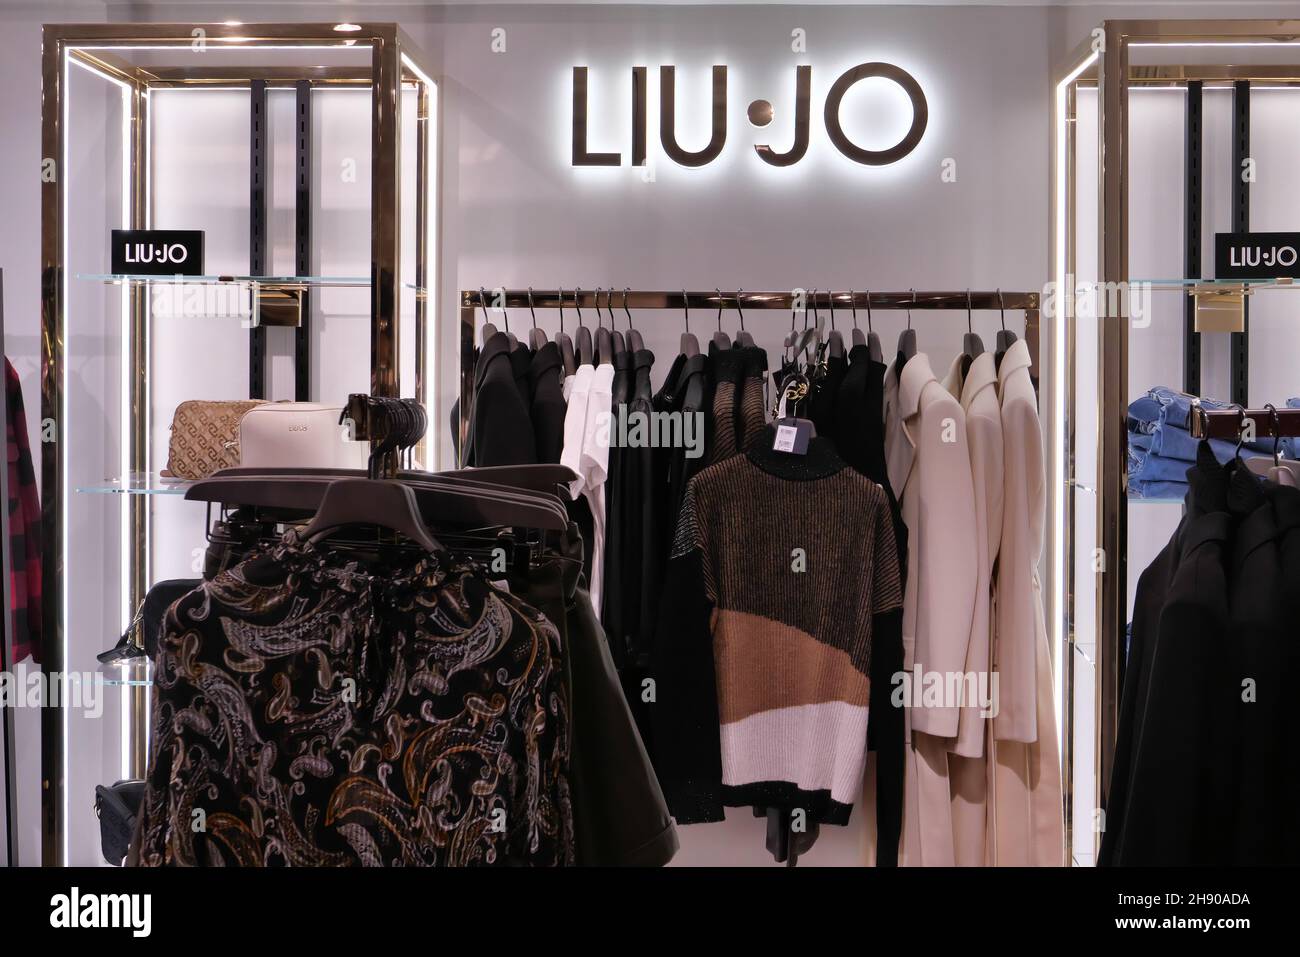 Liu Jo High Resolution Stock Photography and Images - Alamy